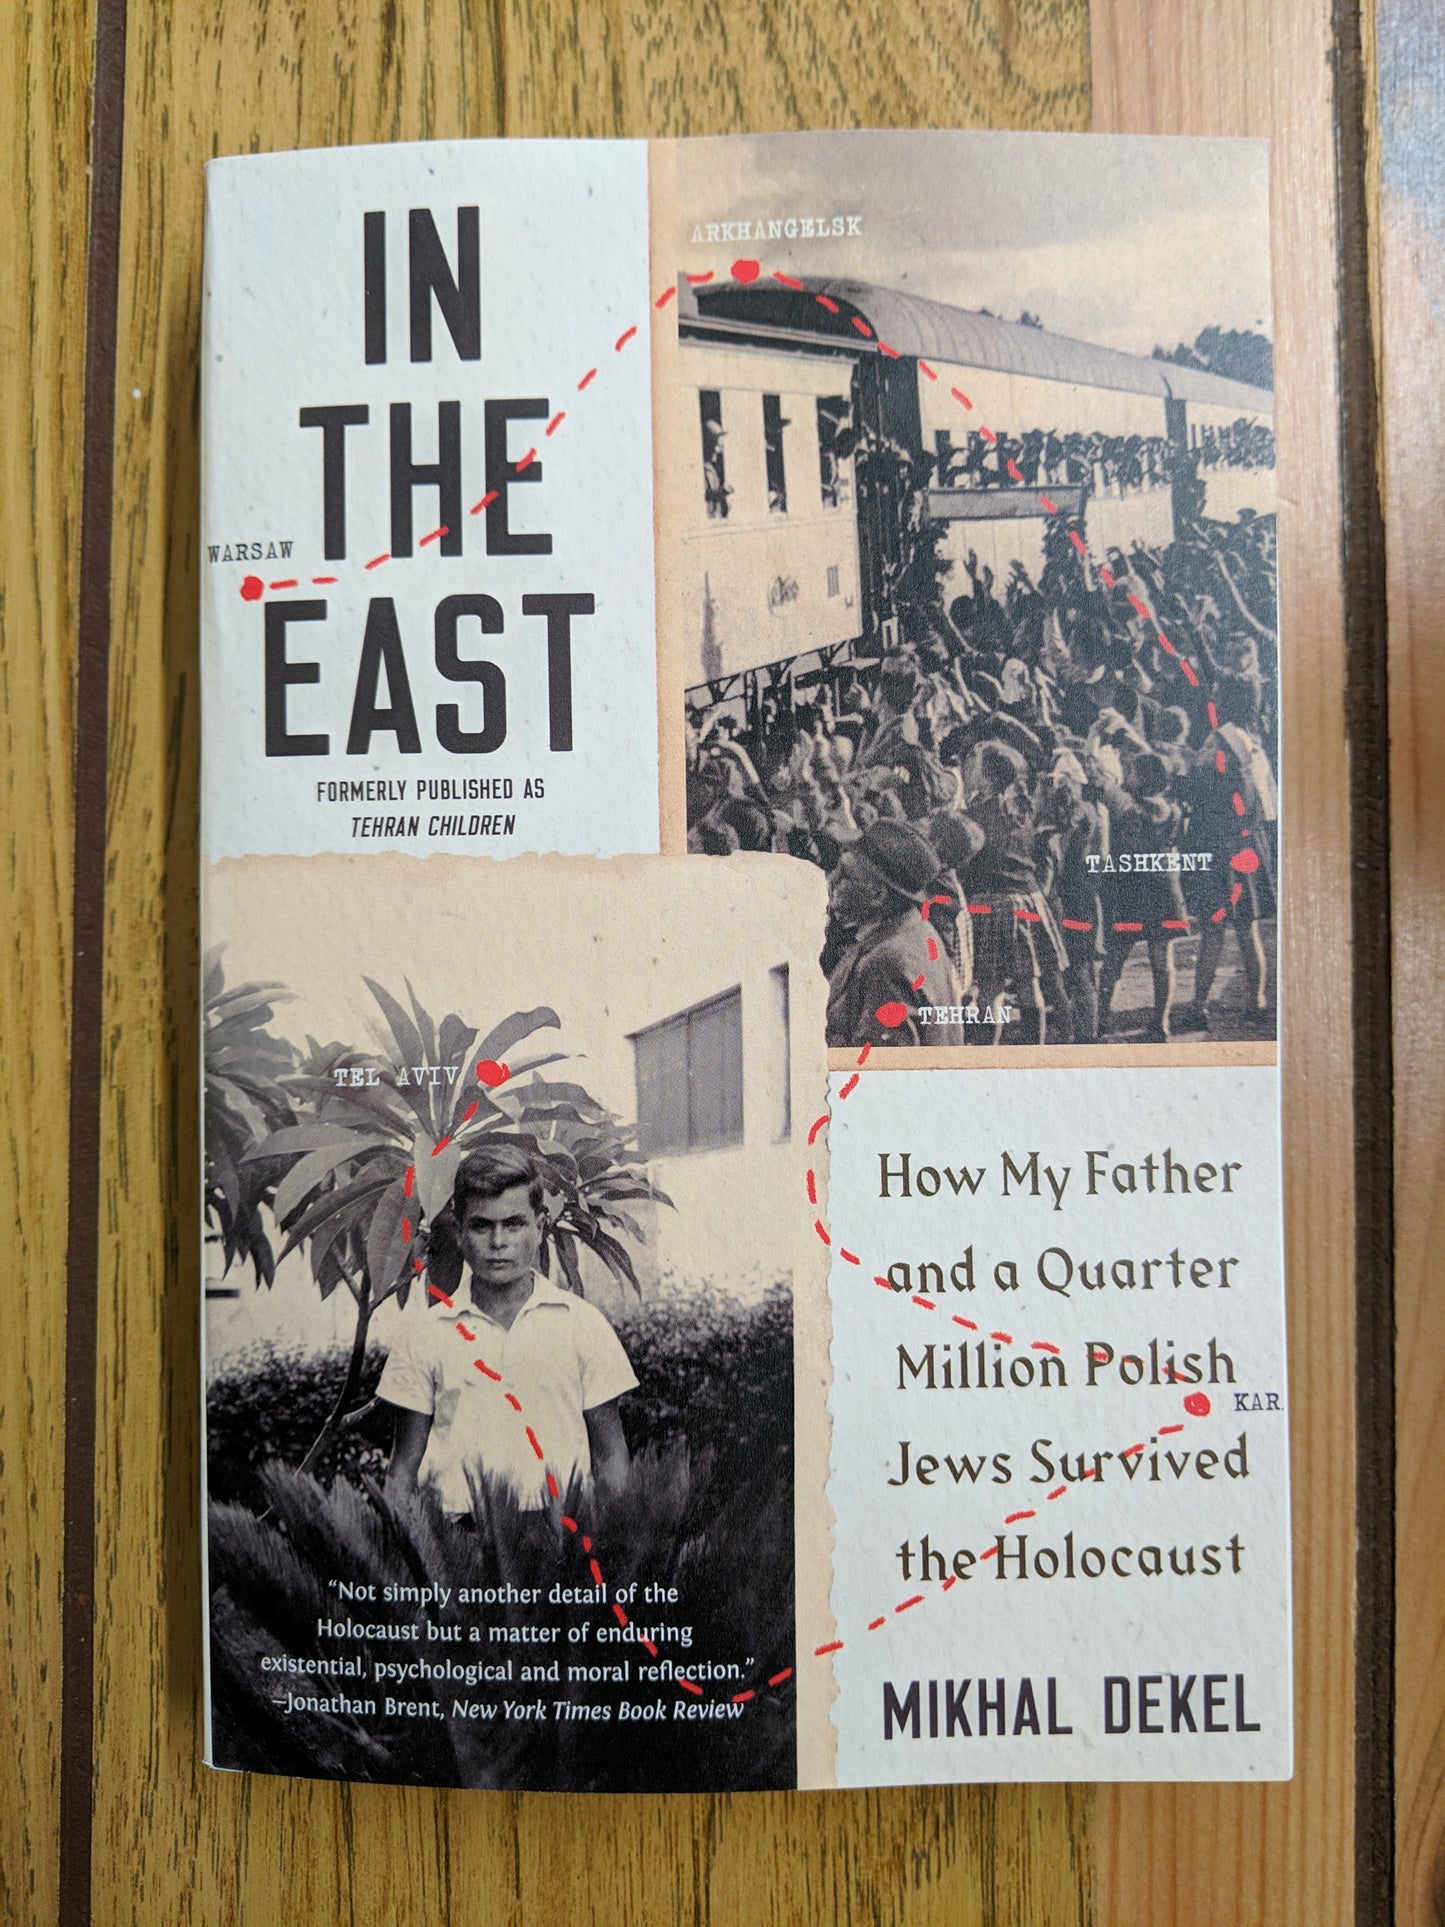 In The East: How My Father and a Quarter Million Polish Jews Survived the Holocaust